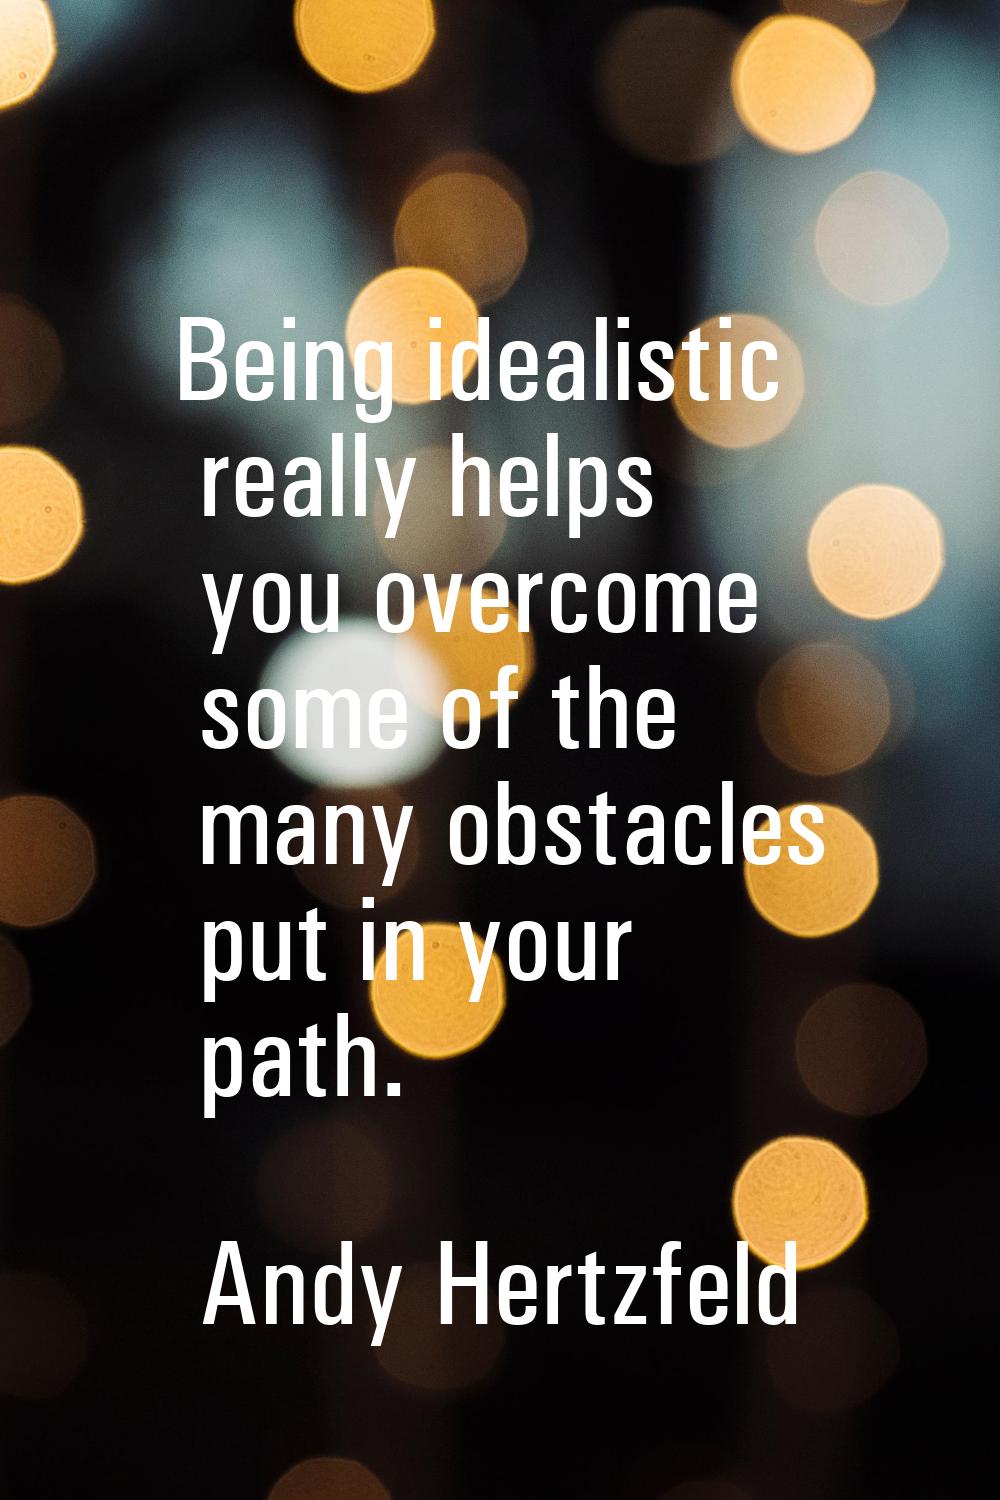 Being idealistic really helps you overcome some of the many obstacles put in your path.